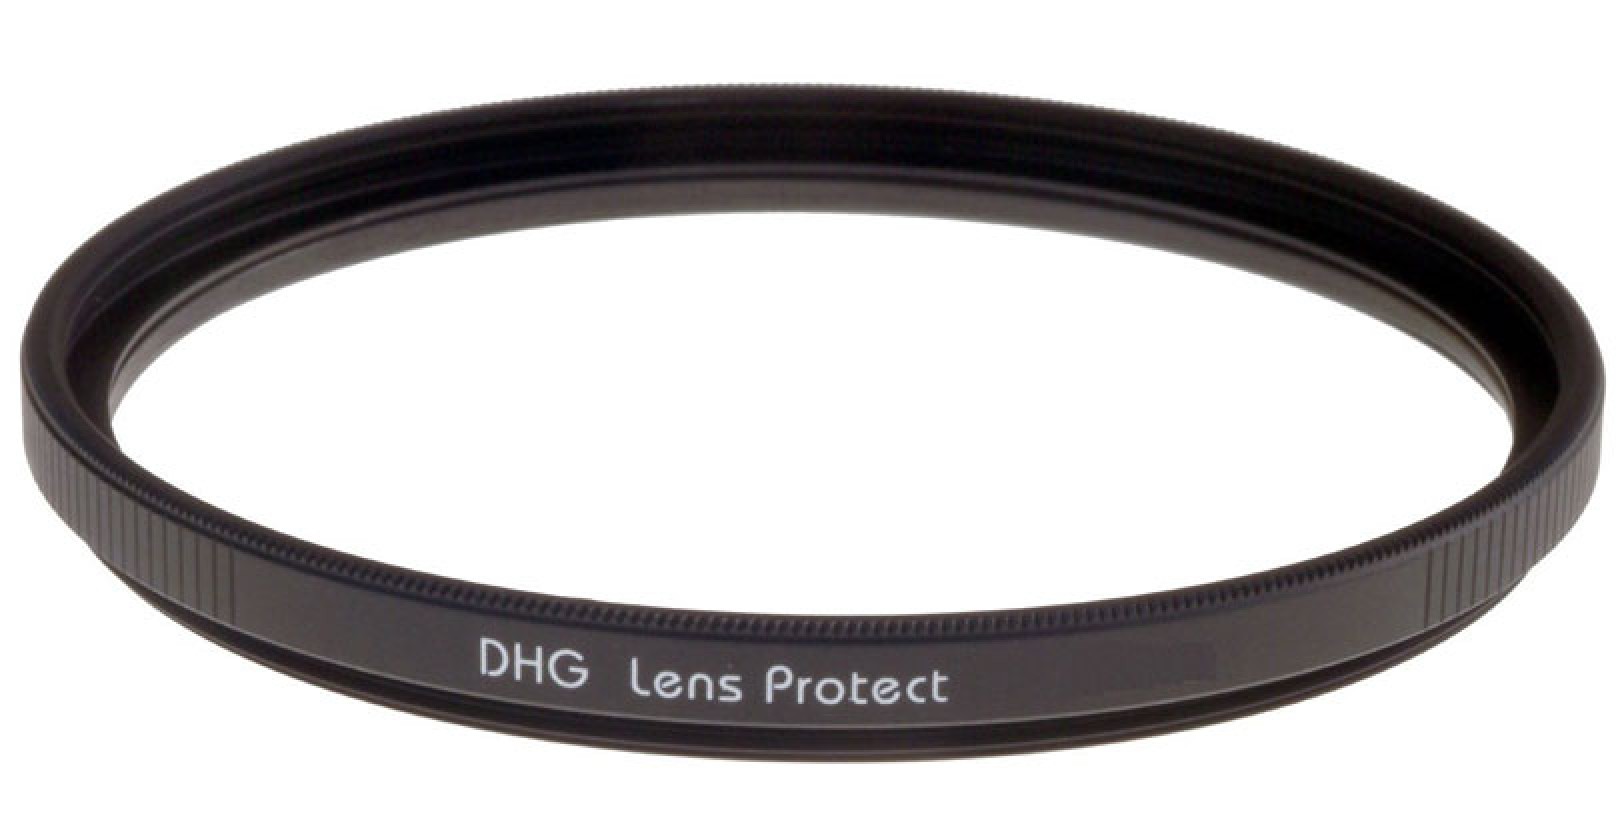 Marumi 43mm DHG lens protect filter